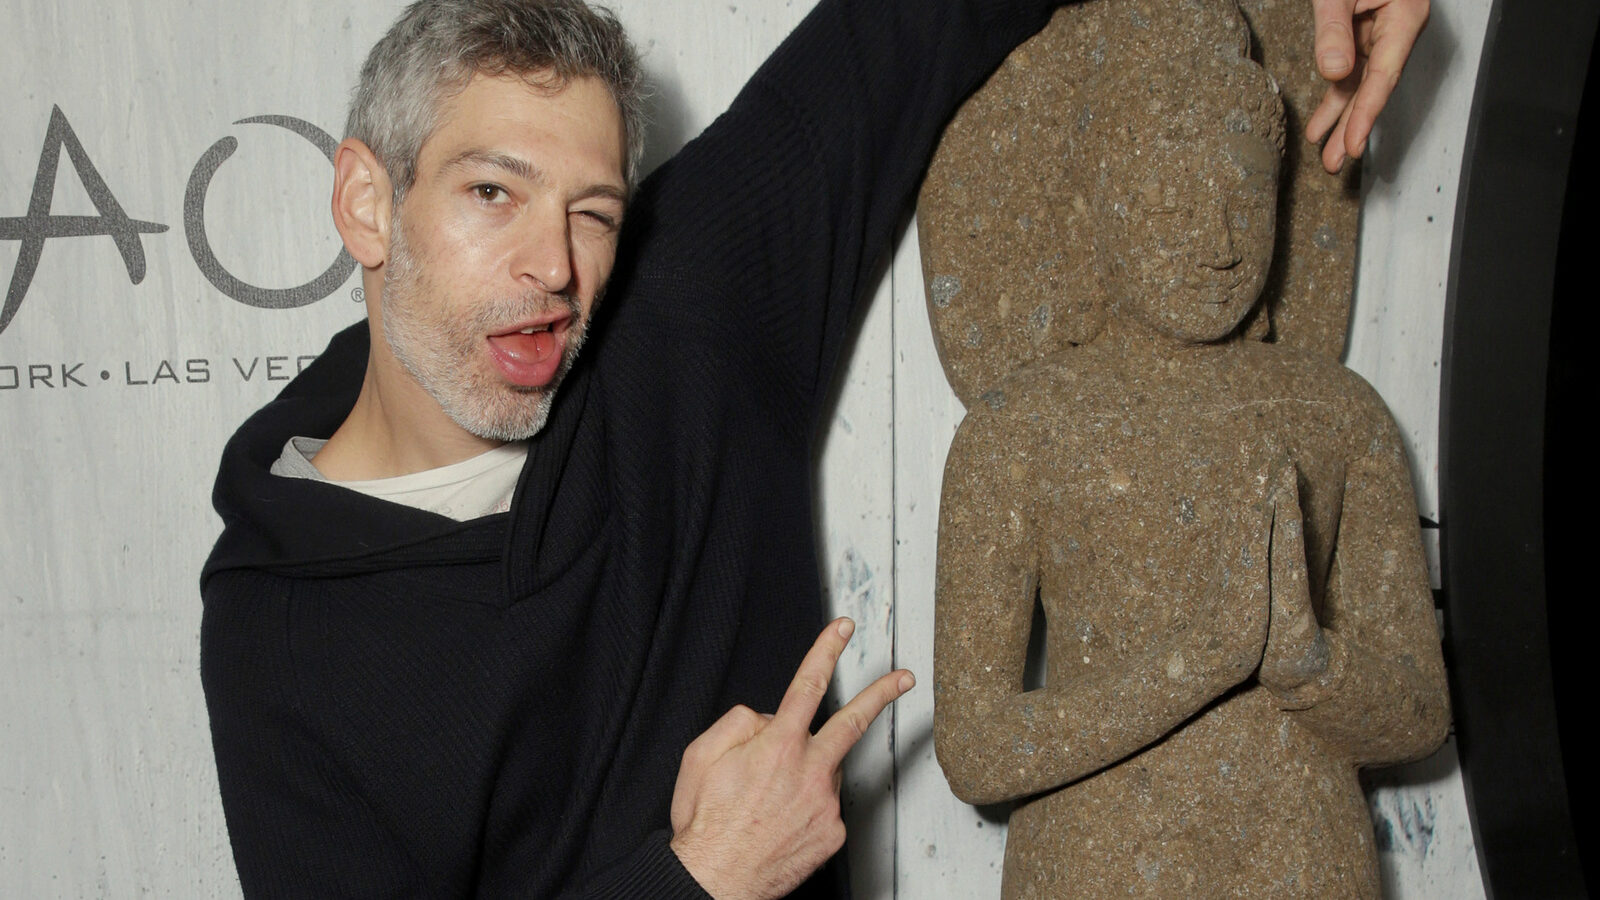 Matisyahu attends TAO Sundance on Sunday, Jan. 25, 2015, in Park City, Utah. (Photo by Todd Williamson/Invision for TAO Group/AP Images)